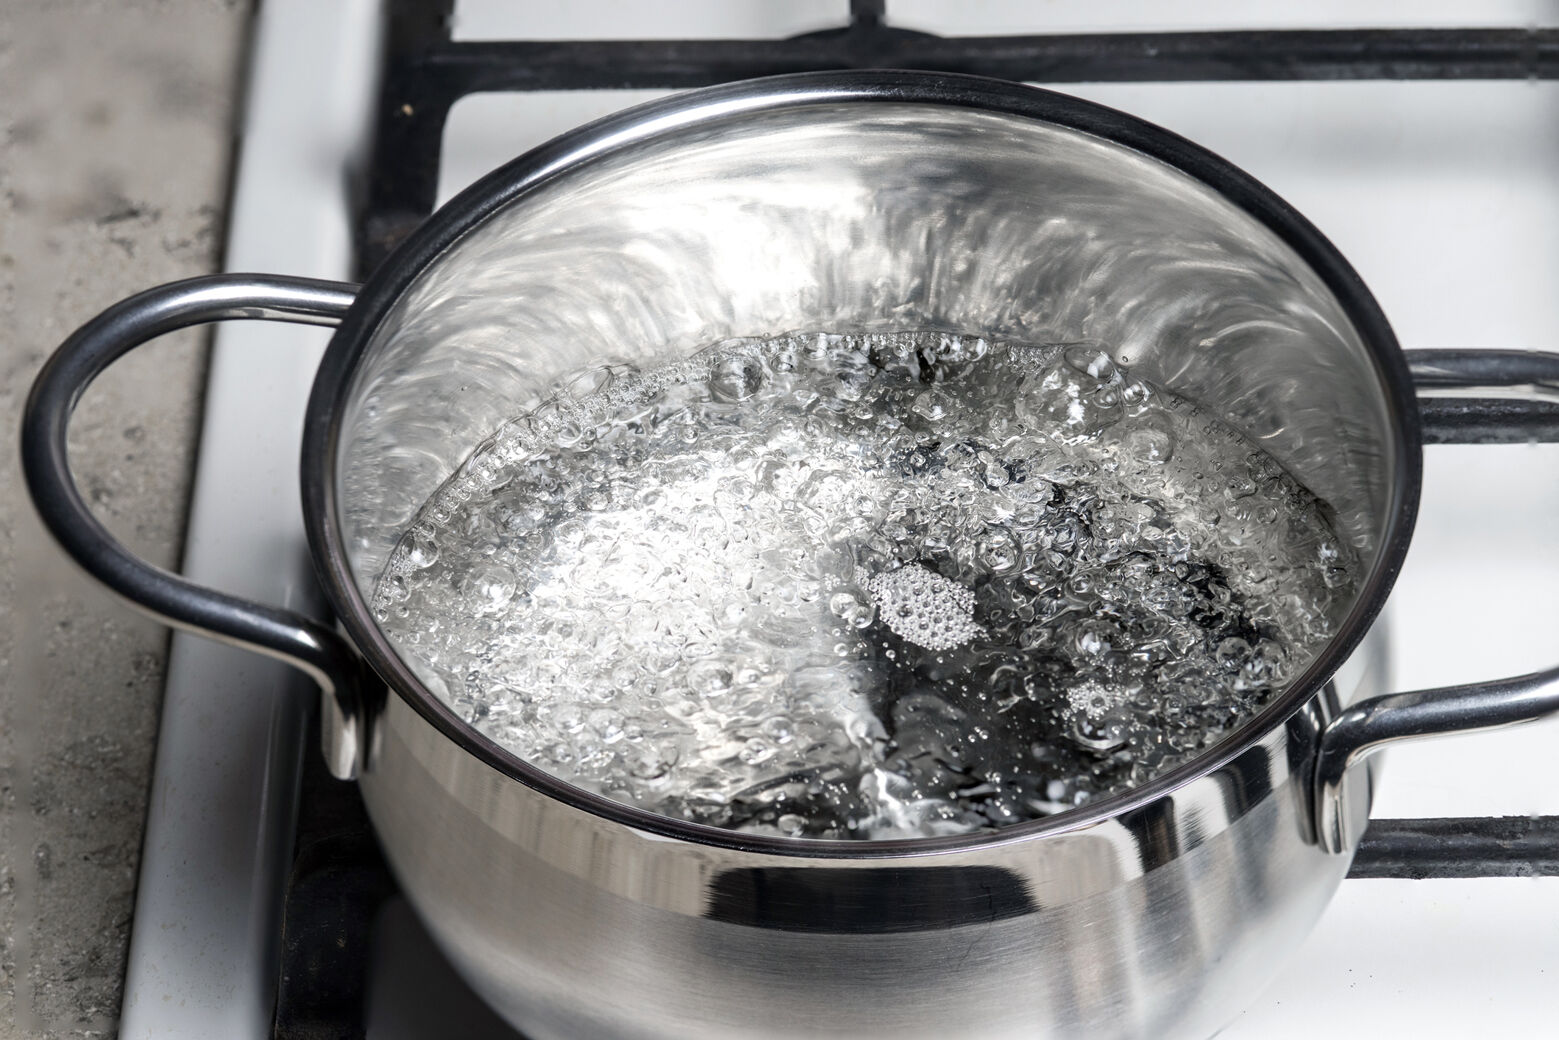 A boil water advisory has been issued for much of Northwest D.C